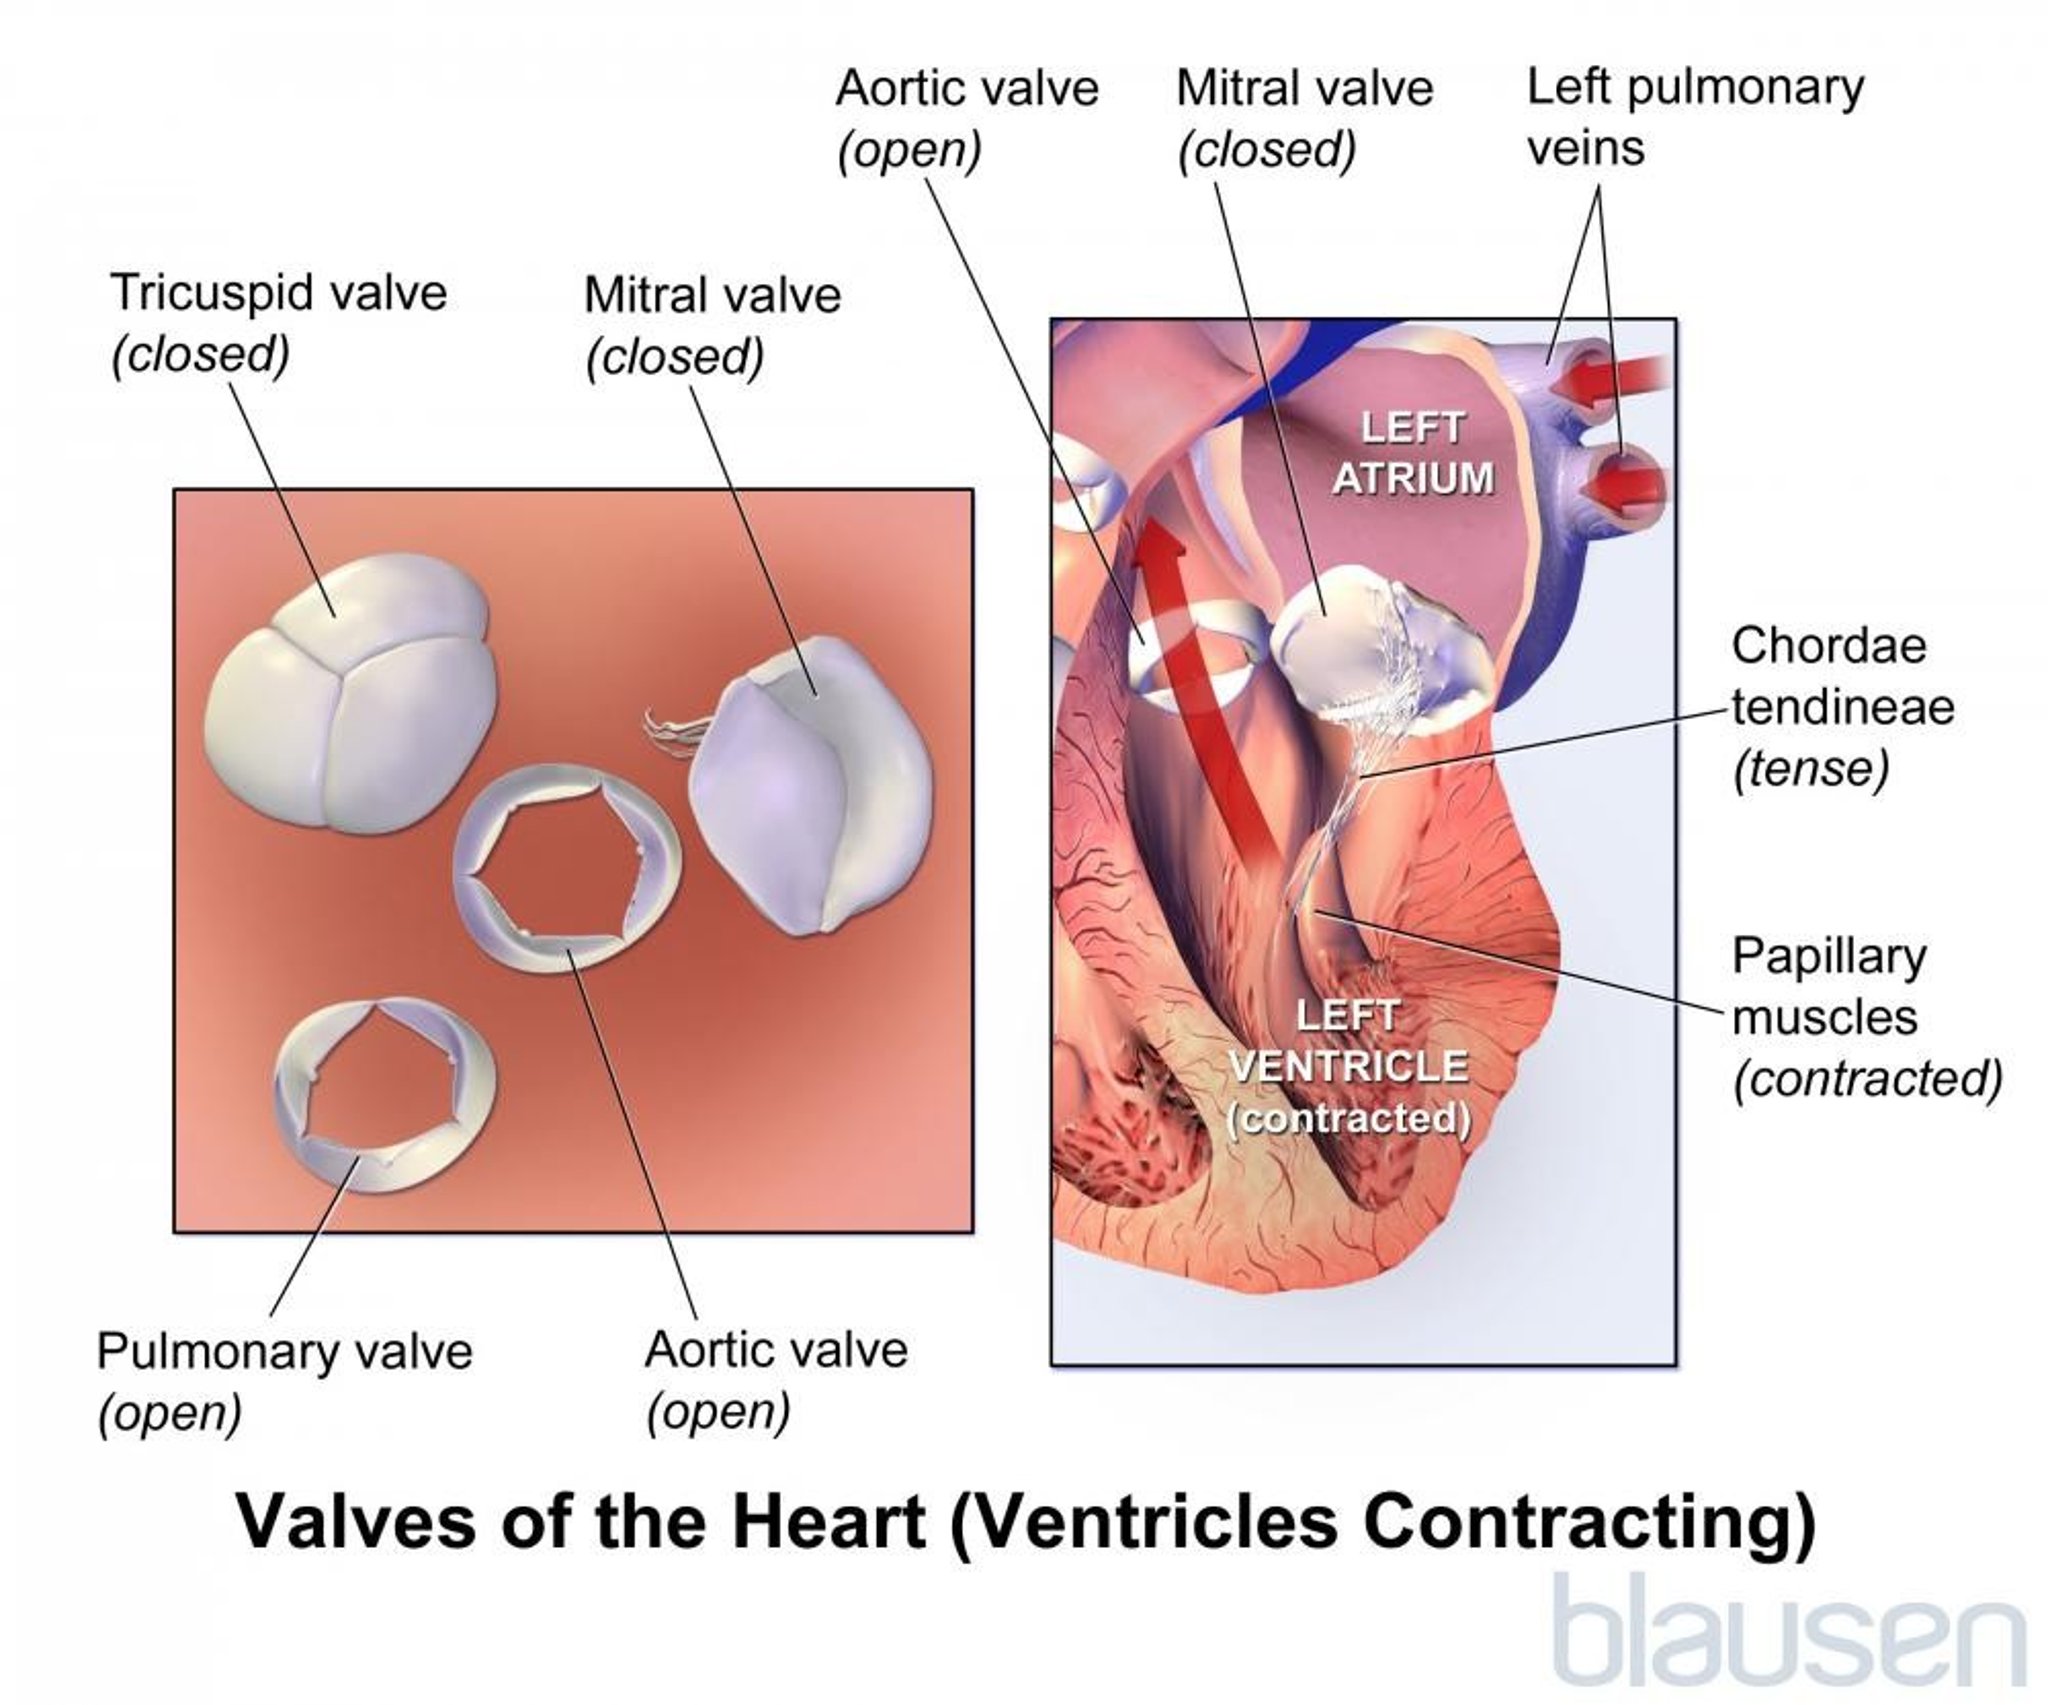 Valves of the Heart (Ventricles Contracting)